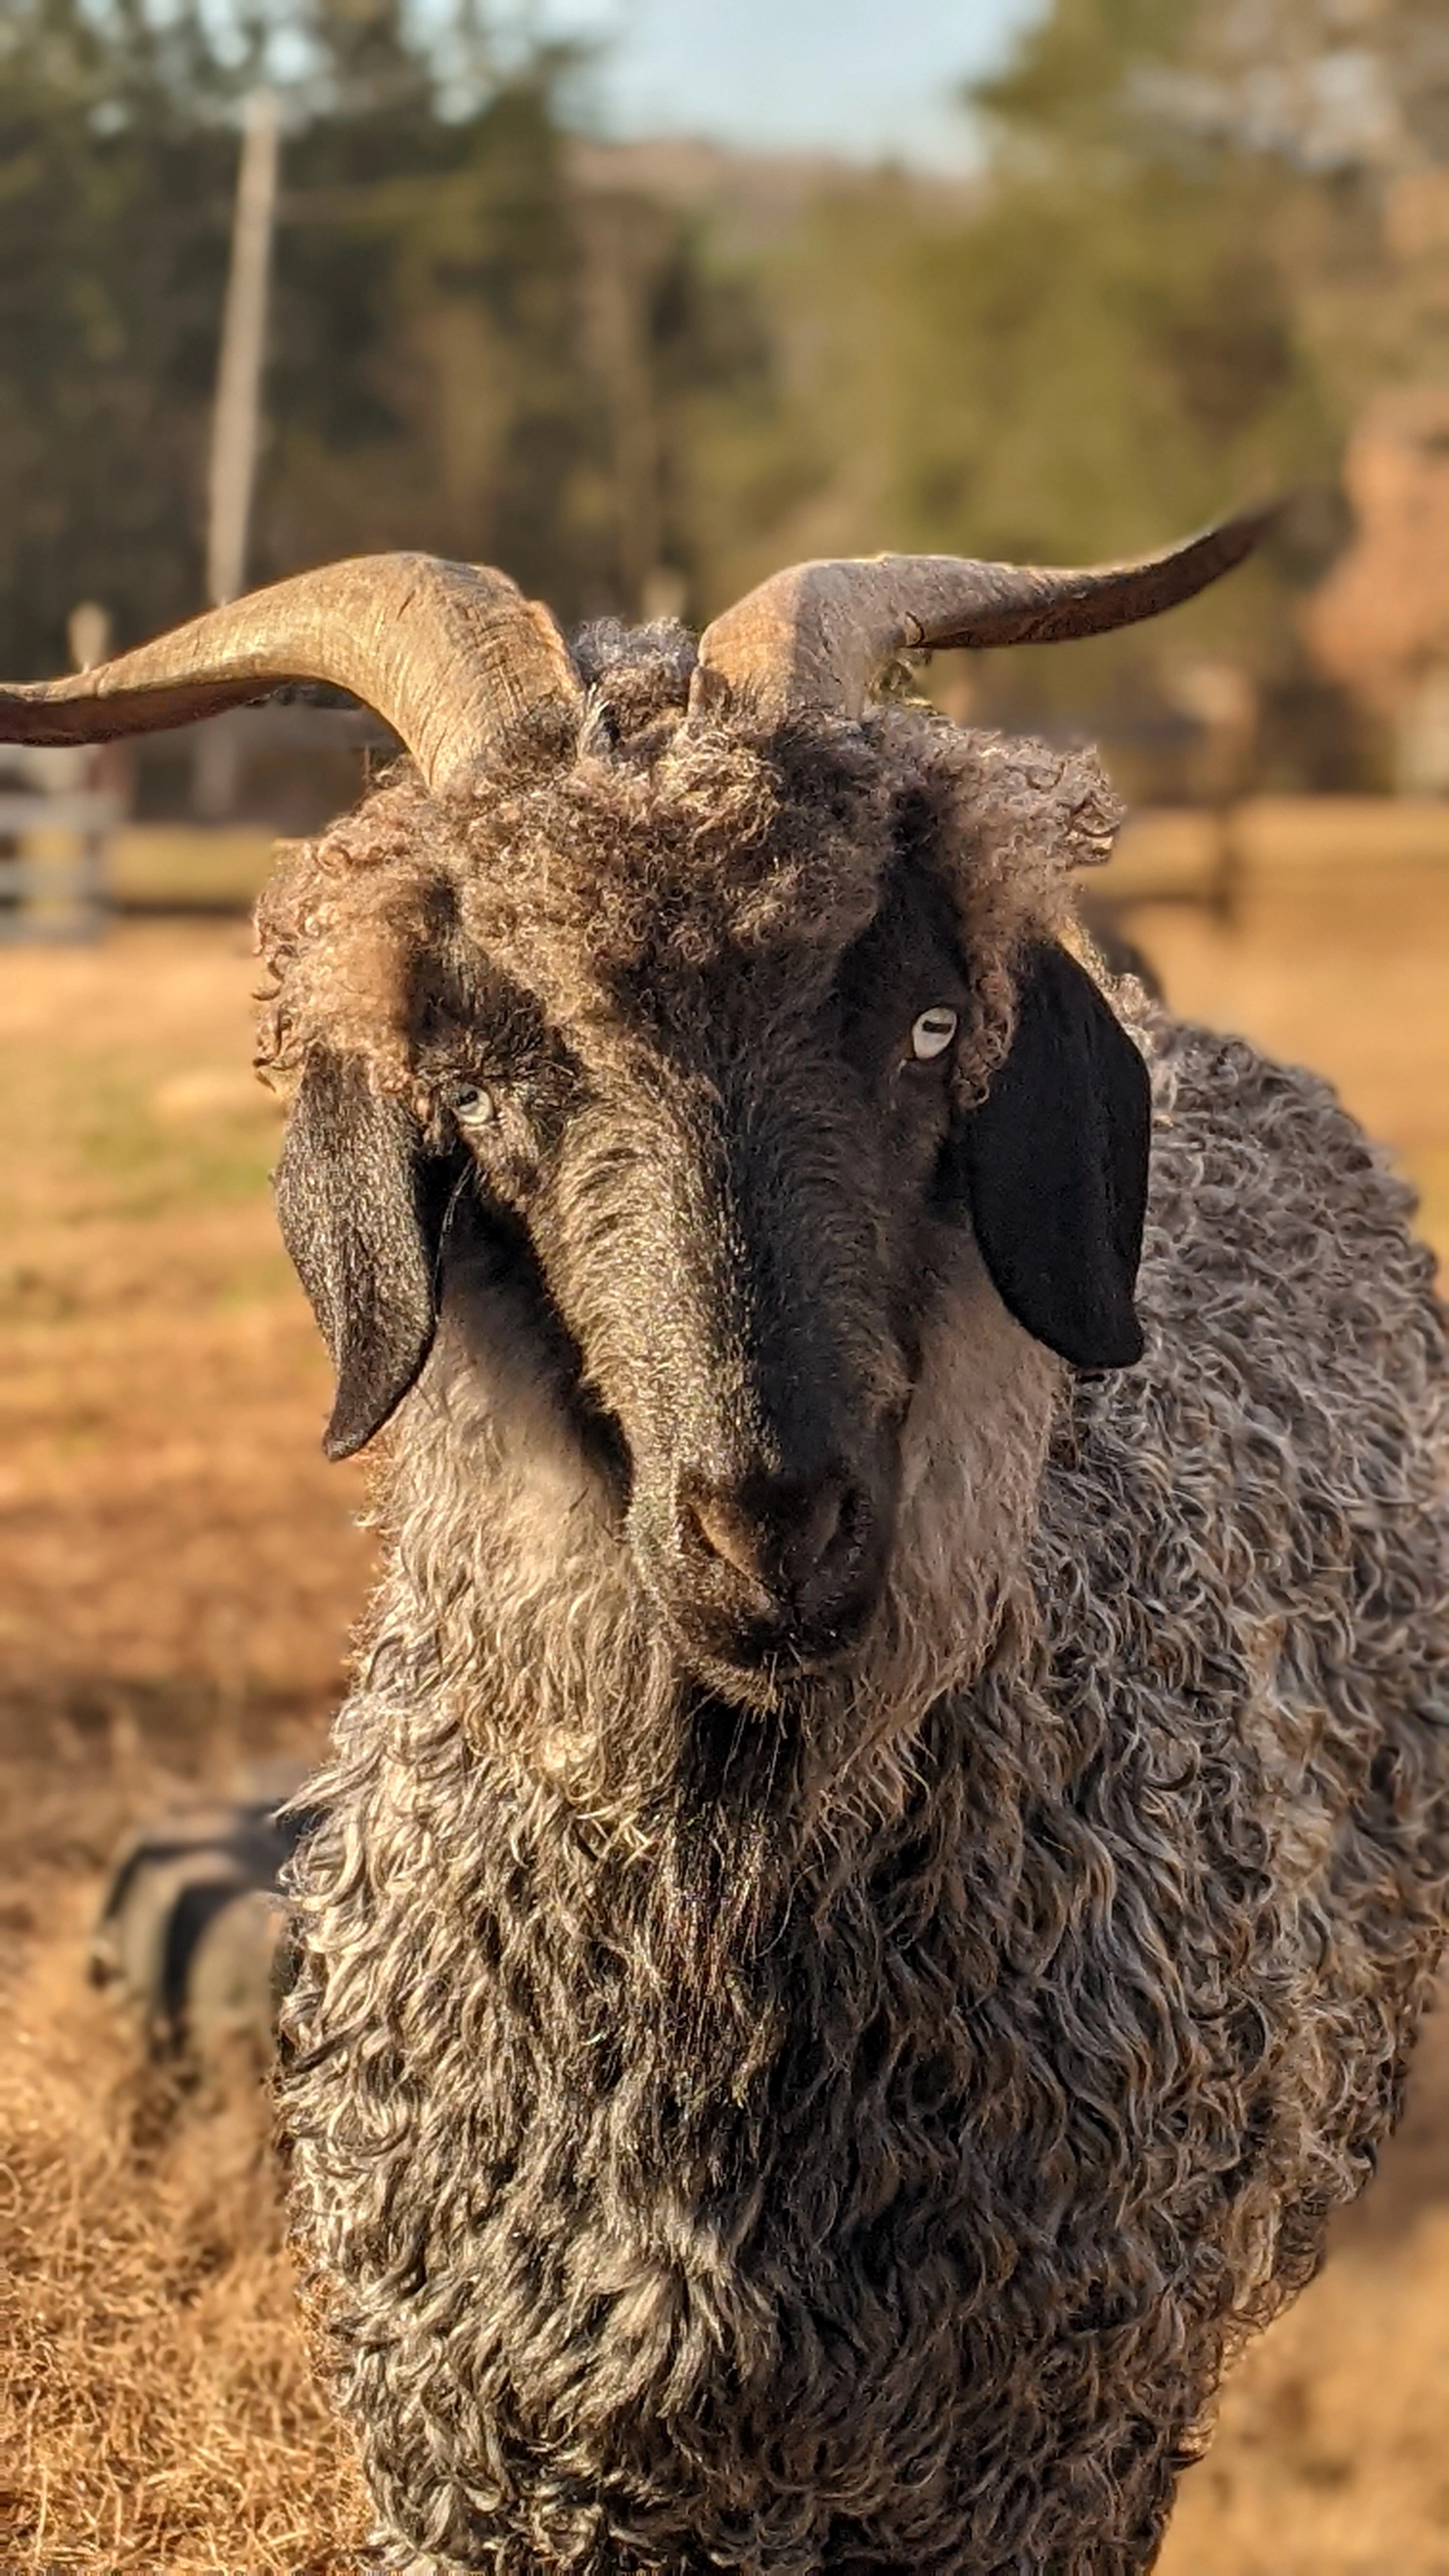 A portrait image of a goat named Norville